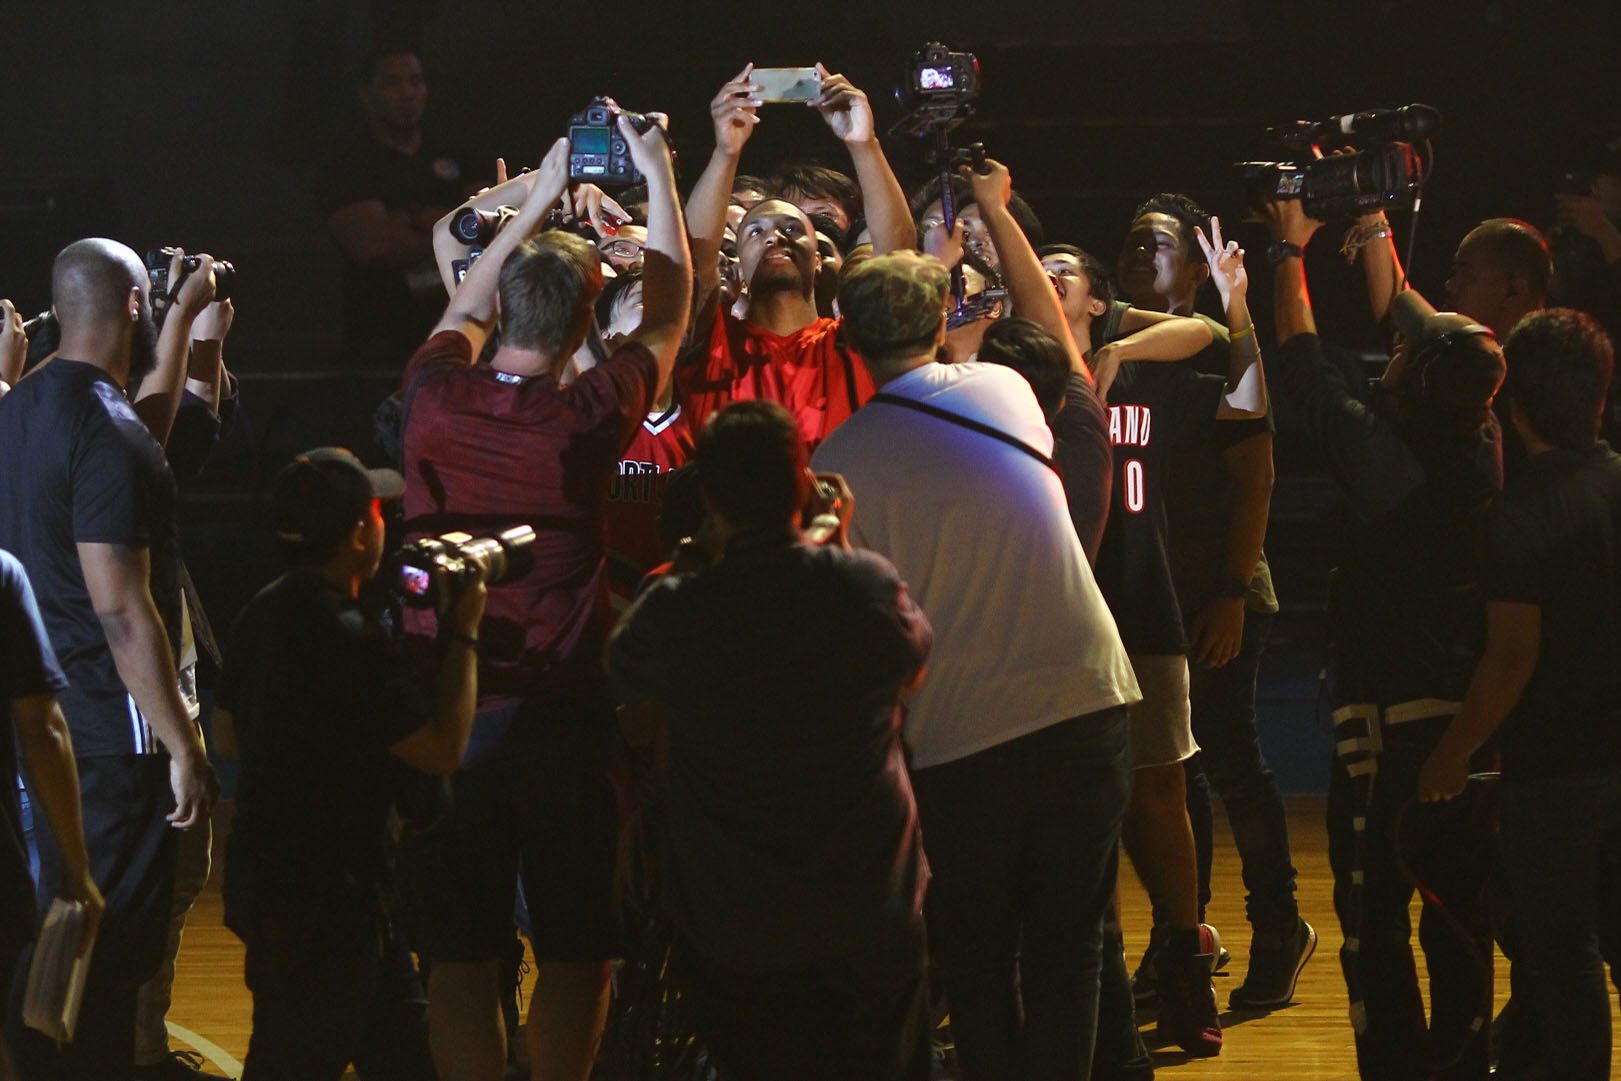 SELFIE TIME. The Trail Blazers star stops to take an image with some fans. Photo by Josh Albelda/ Rappler 